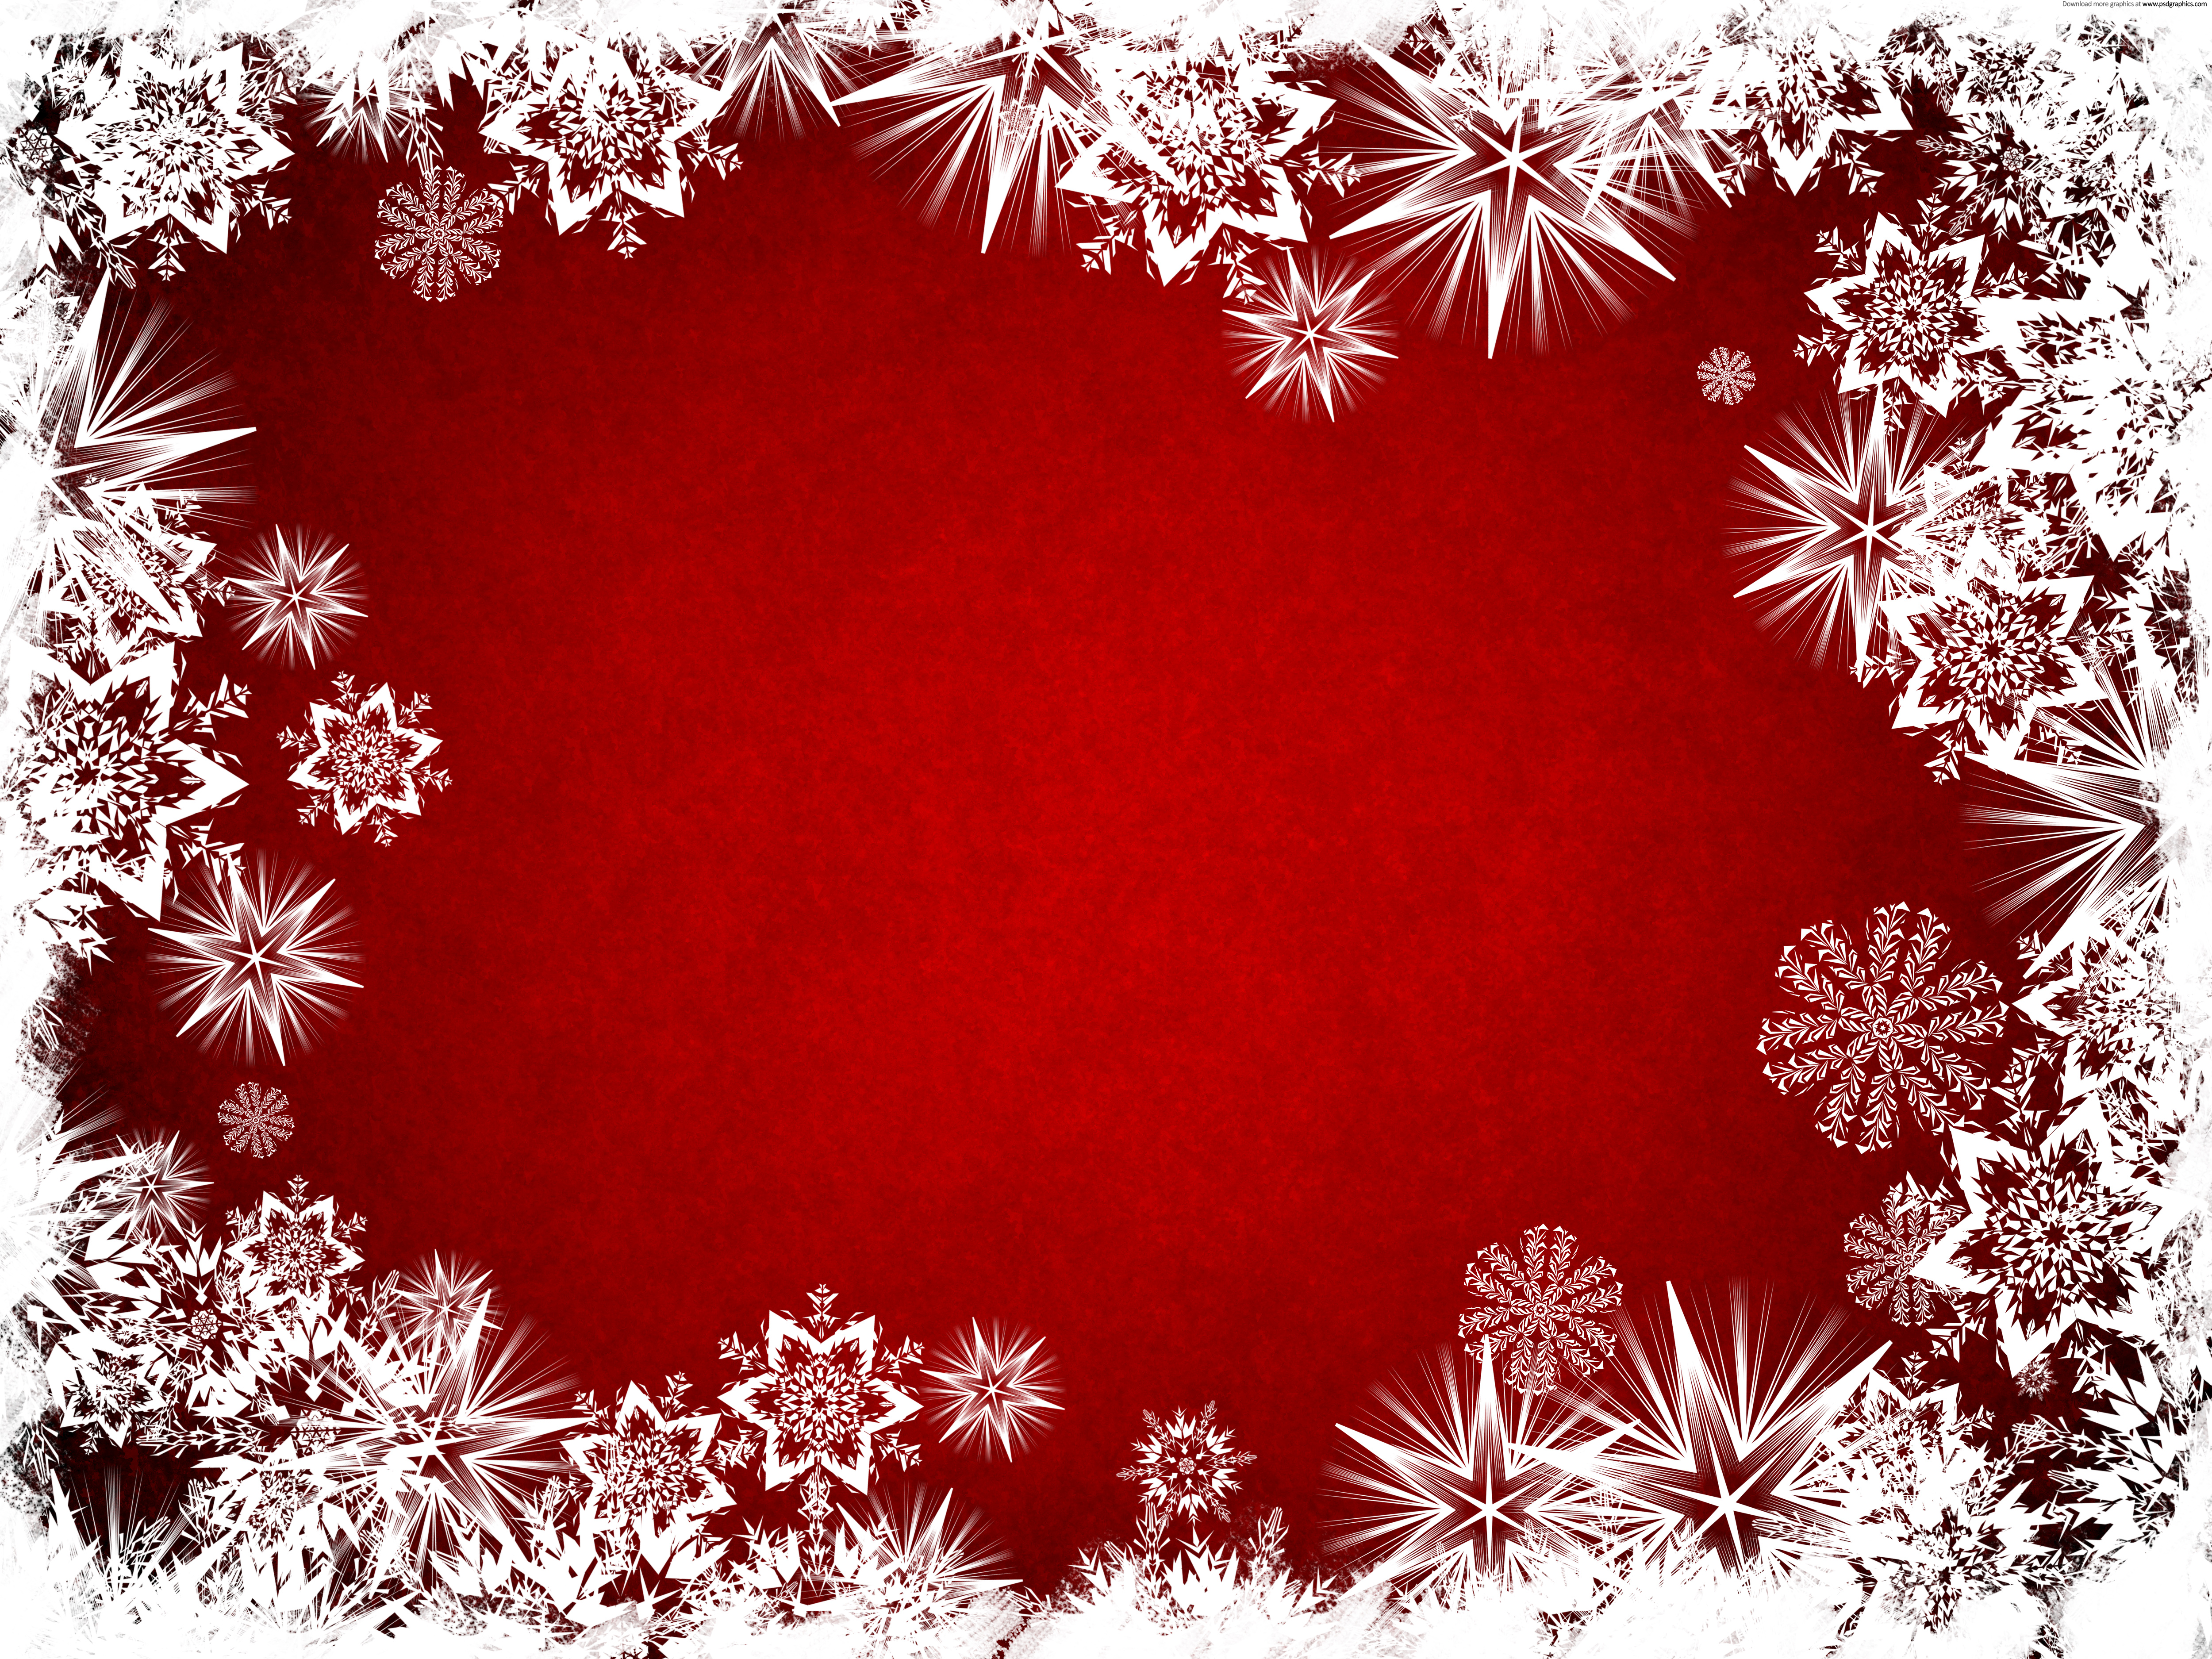 Abstract Christmas background | PSDGraphics